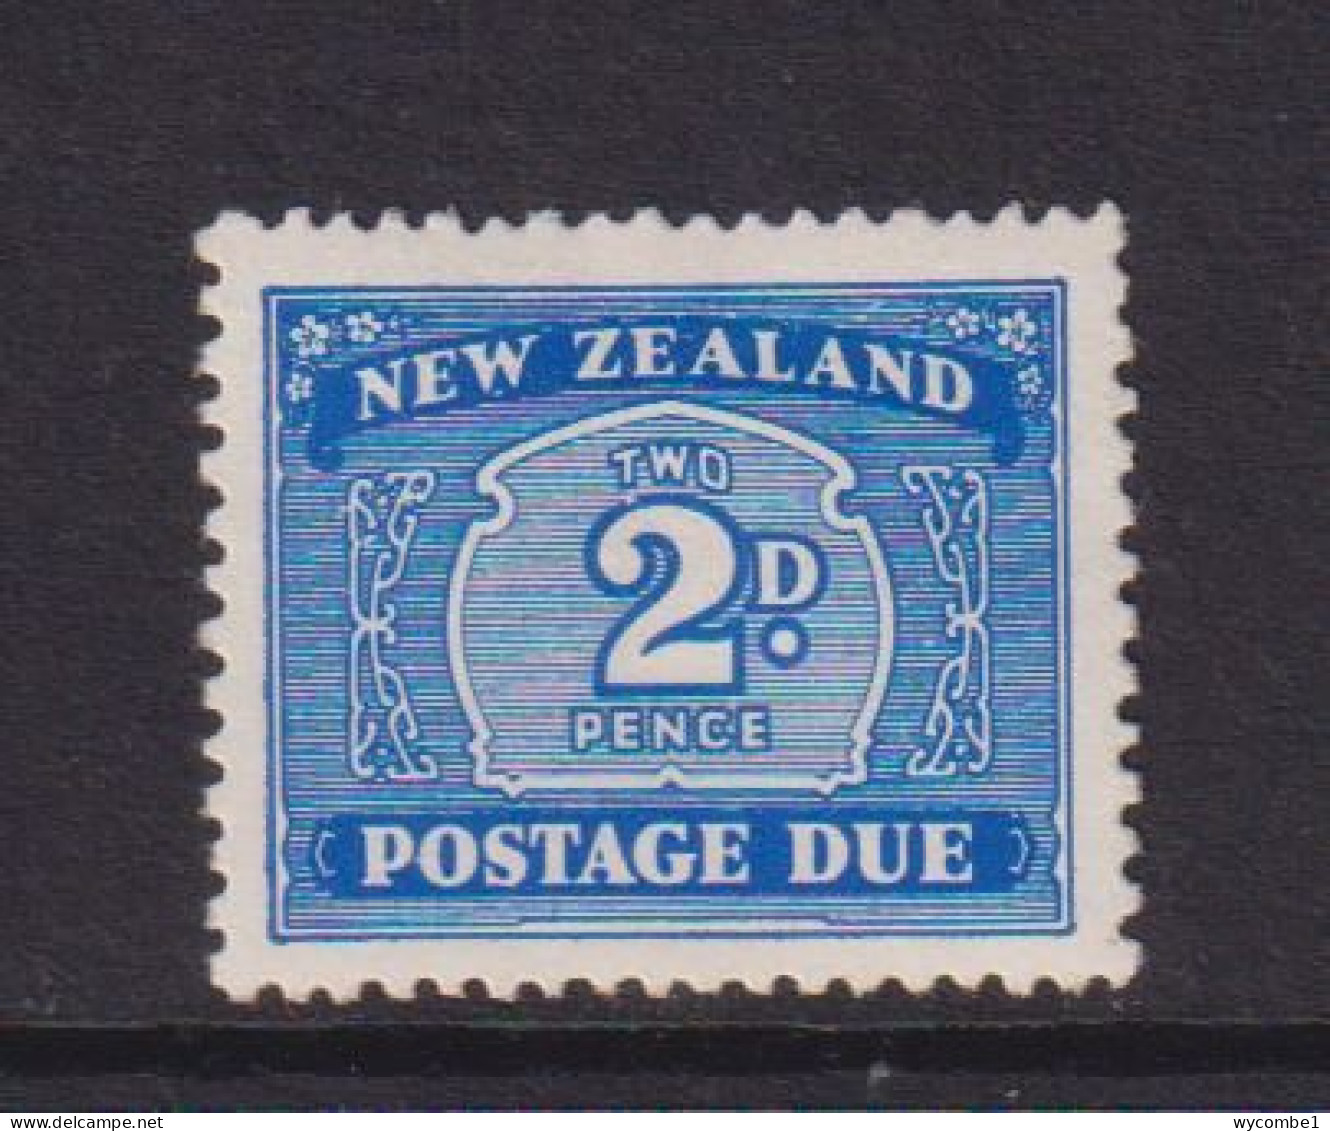 NEW ZEALAND  - 1939 Postage Due 2d Hinged Mint - Timbres-taxe